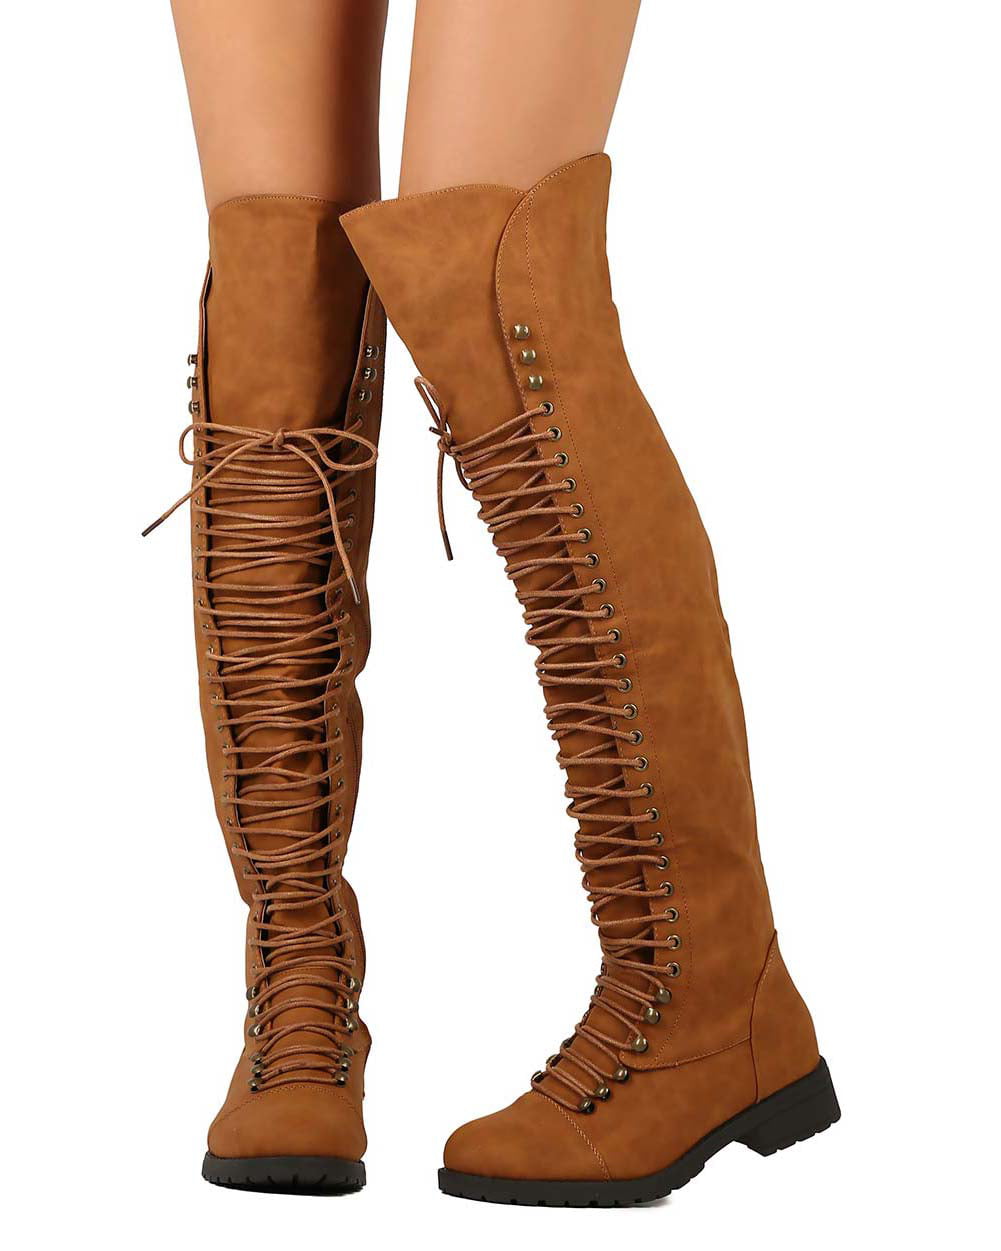 thigh high lace up combat boots